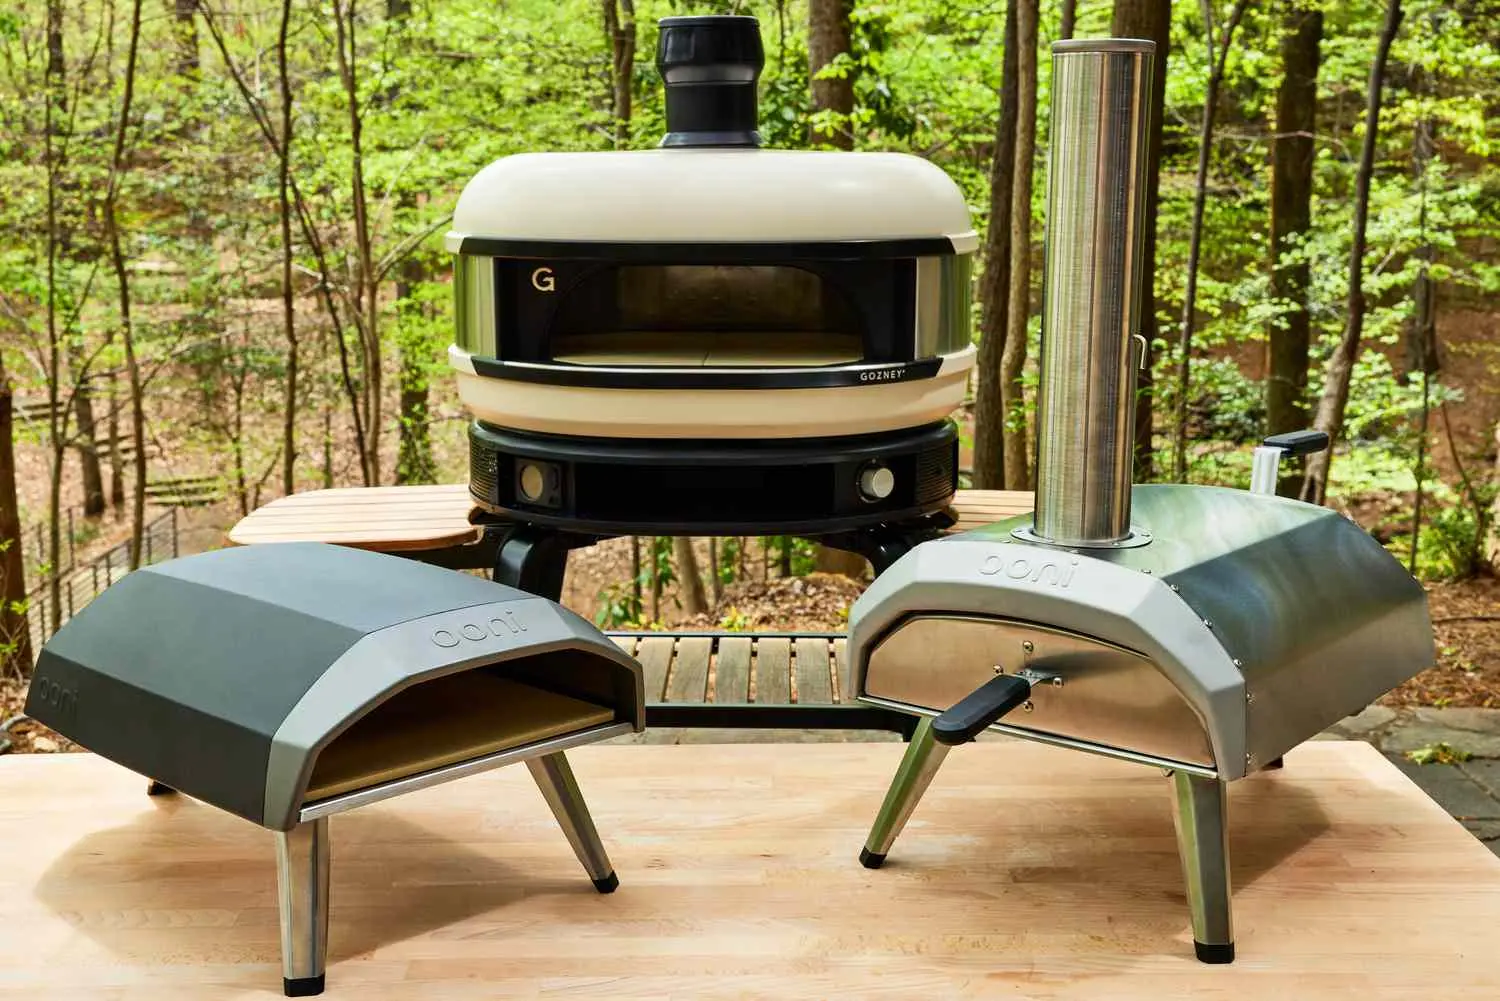 best outdoor pizza oven - What is the most efficient pizza oven design